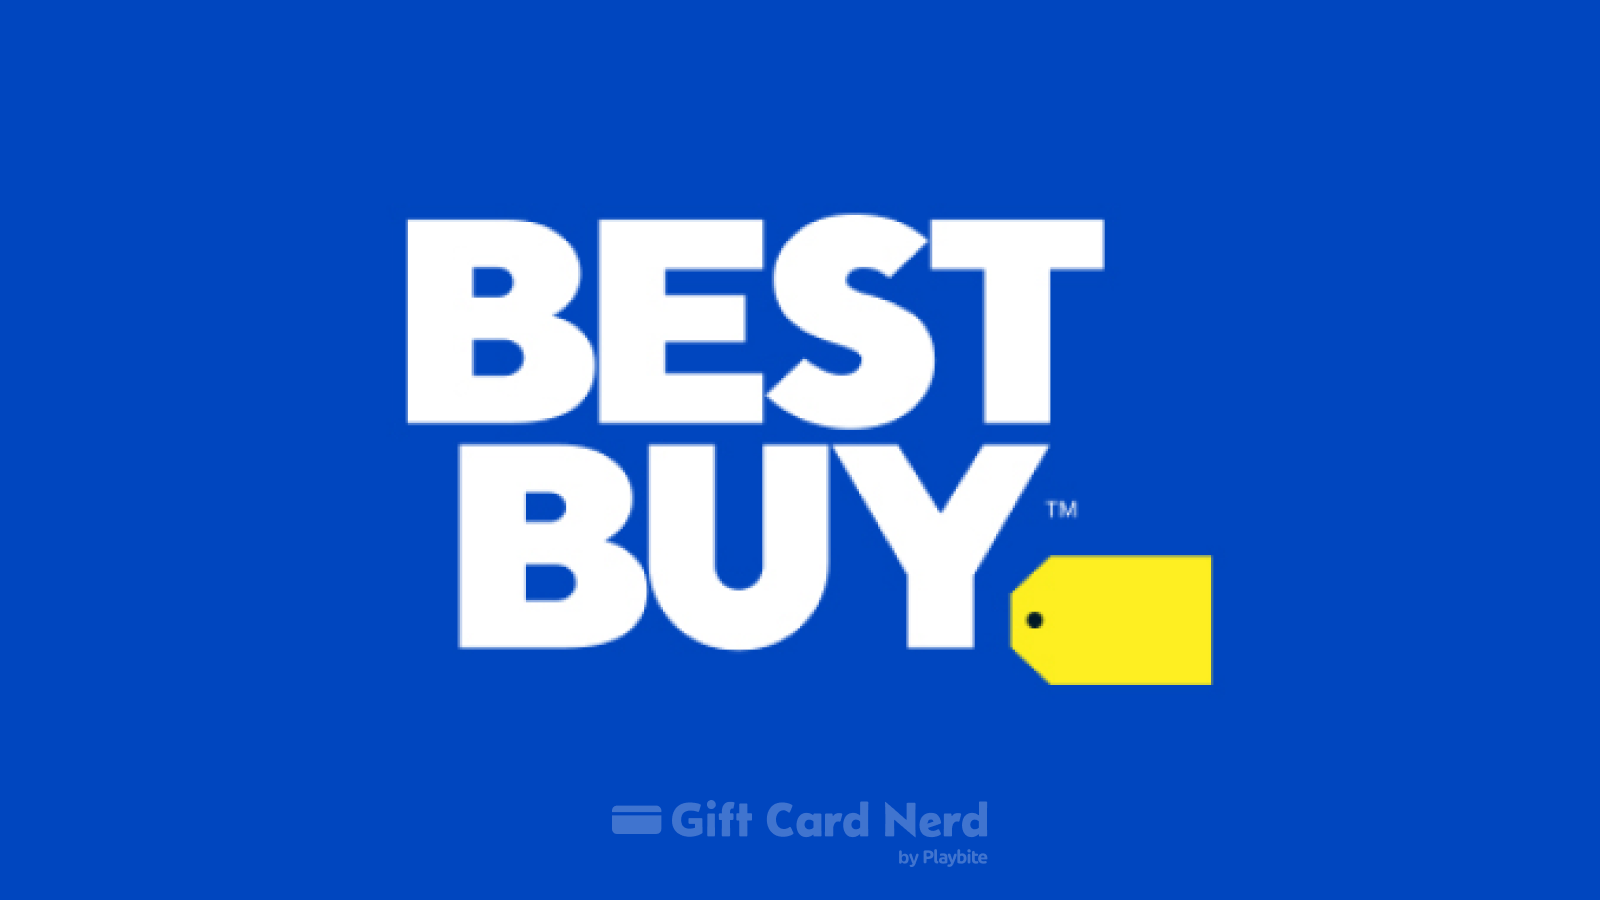 Can I Use a Best Buy Gift Card on Roblox?